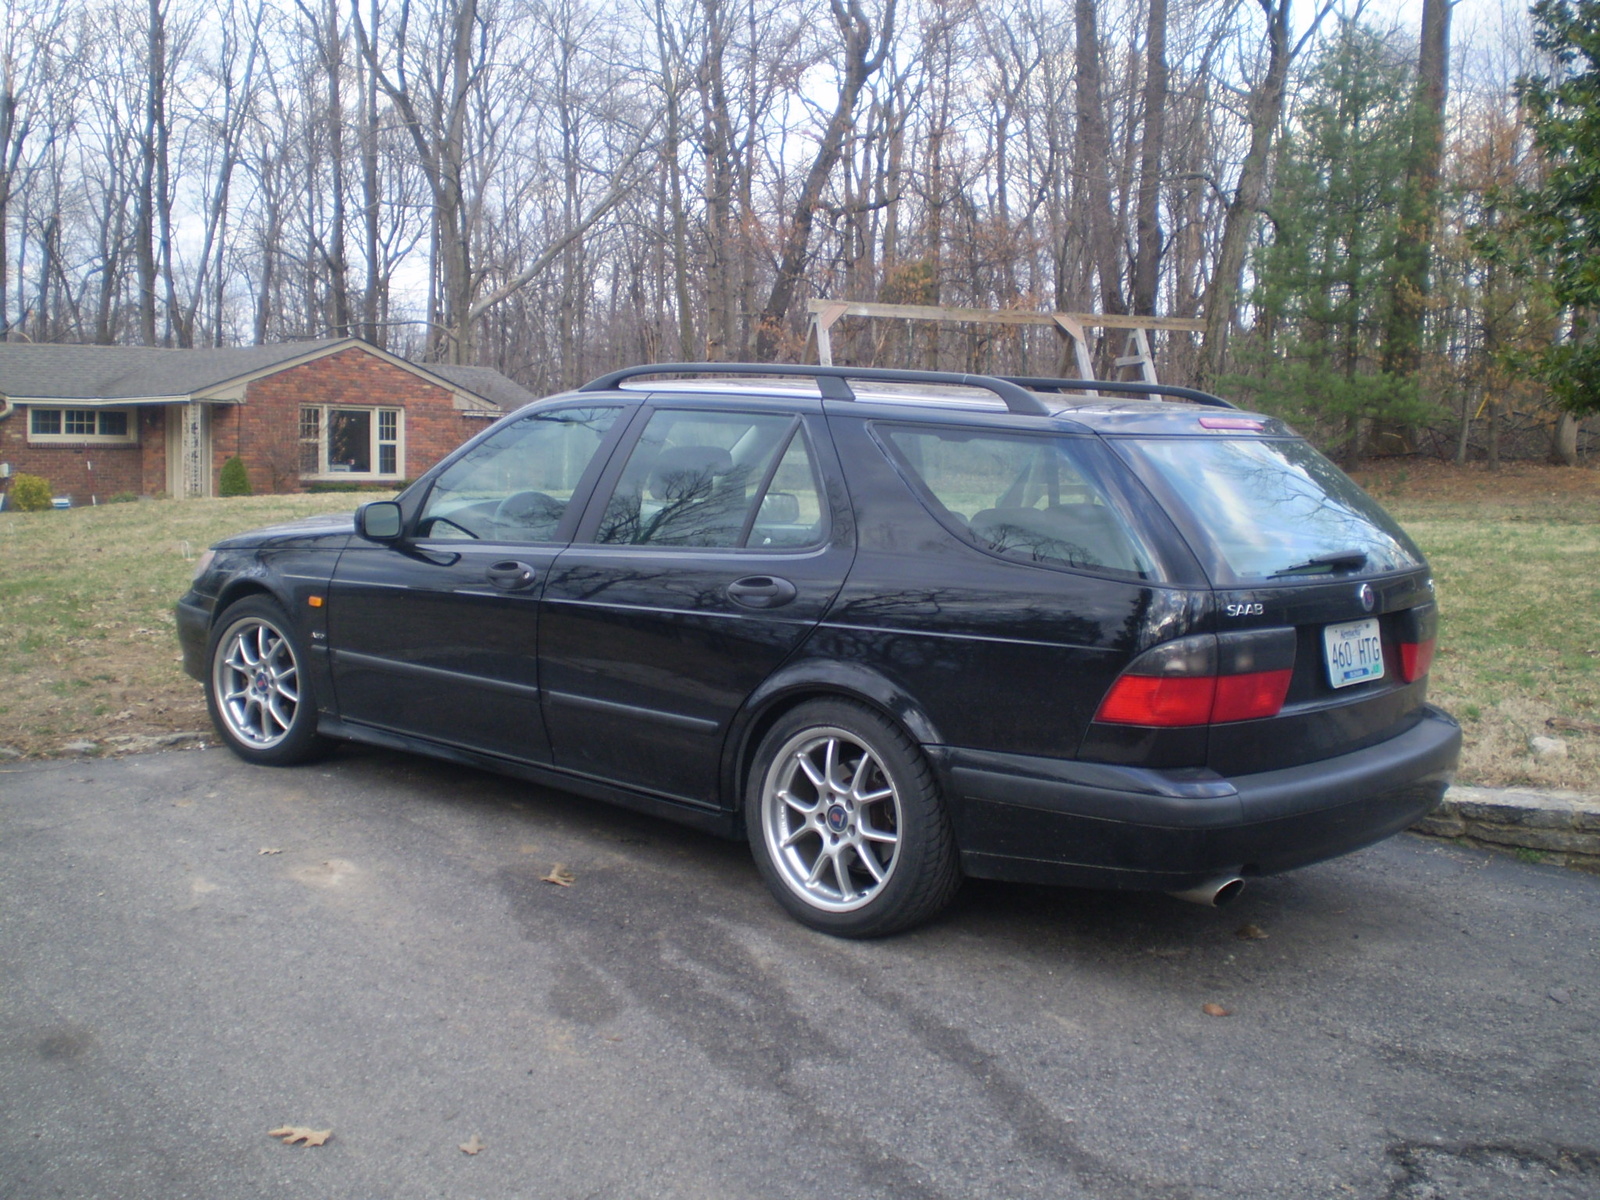 2000 Saab 9-5 Aero Wagon - Pictures - Picture of 2000 Saab 9-5 ...